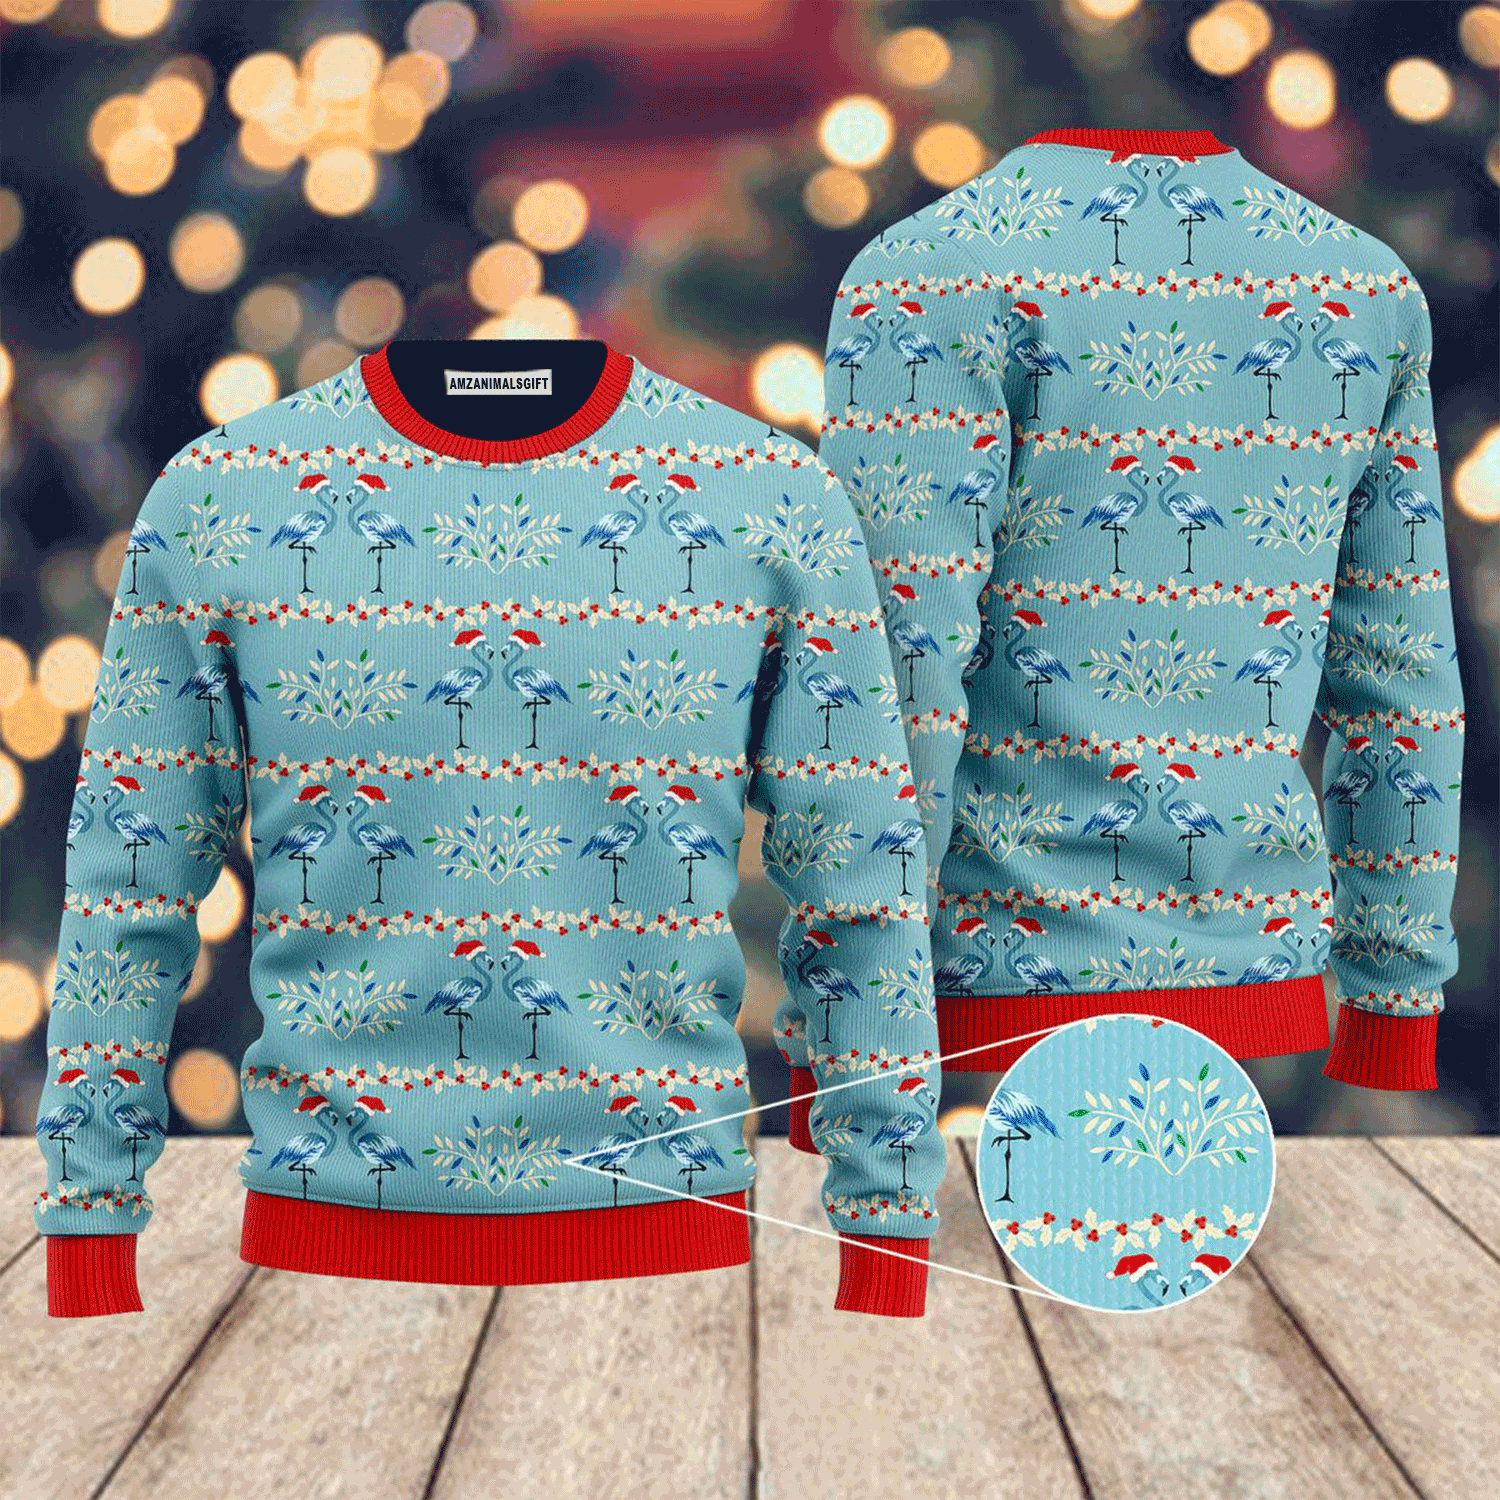 Fa La La Min Go Couple Xmas Sweater, Ugly Sweater For Men & Women, Perfect Outfit For Christmas New Year Autumn Winter